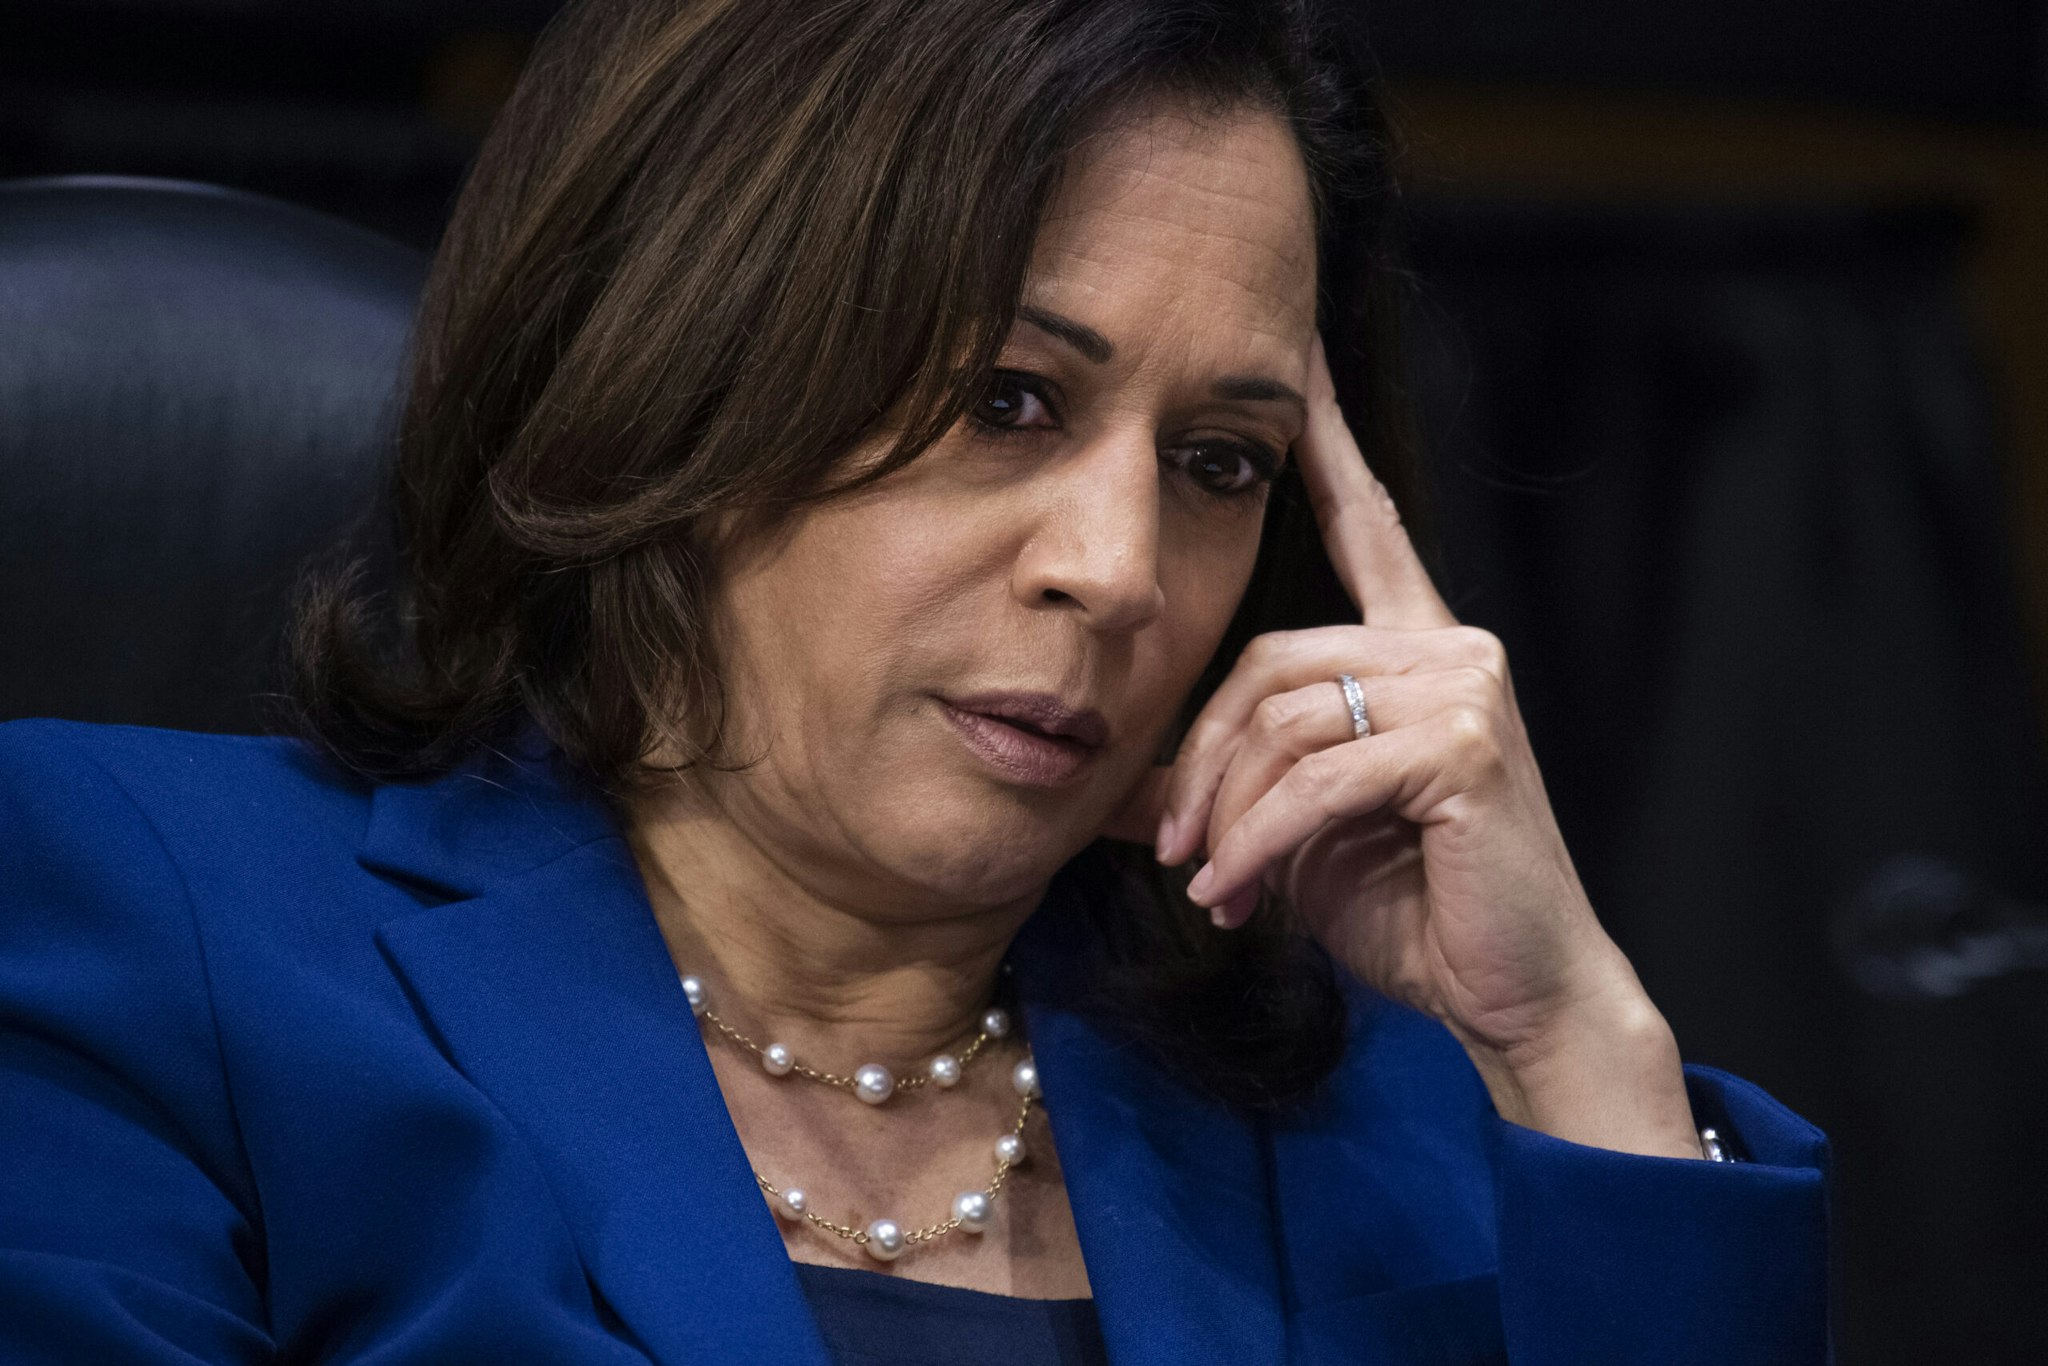 Senator Kamala Harris, a Democrat from California, listens during a Senate Judiciary Committee hearing in Washington, D.C., U.S., on Tuesday, June 16, 2020. Senate Republicans are weighing proposals to improve police practices in response to massive protests over the killing of George Floyd in Minneapolis, including racial bias training, increased use of body cameras and finally enacting the first federal anti-lynching law. Photographer: Tom Williams/CQ Roll Call/Bloomberg via Getty Images